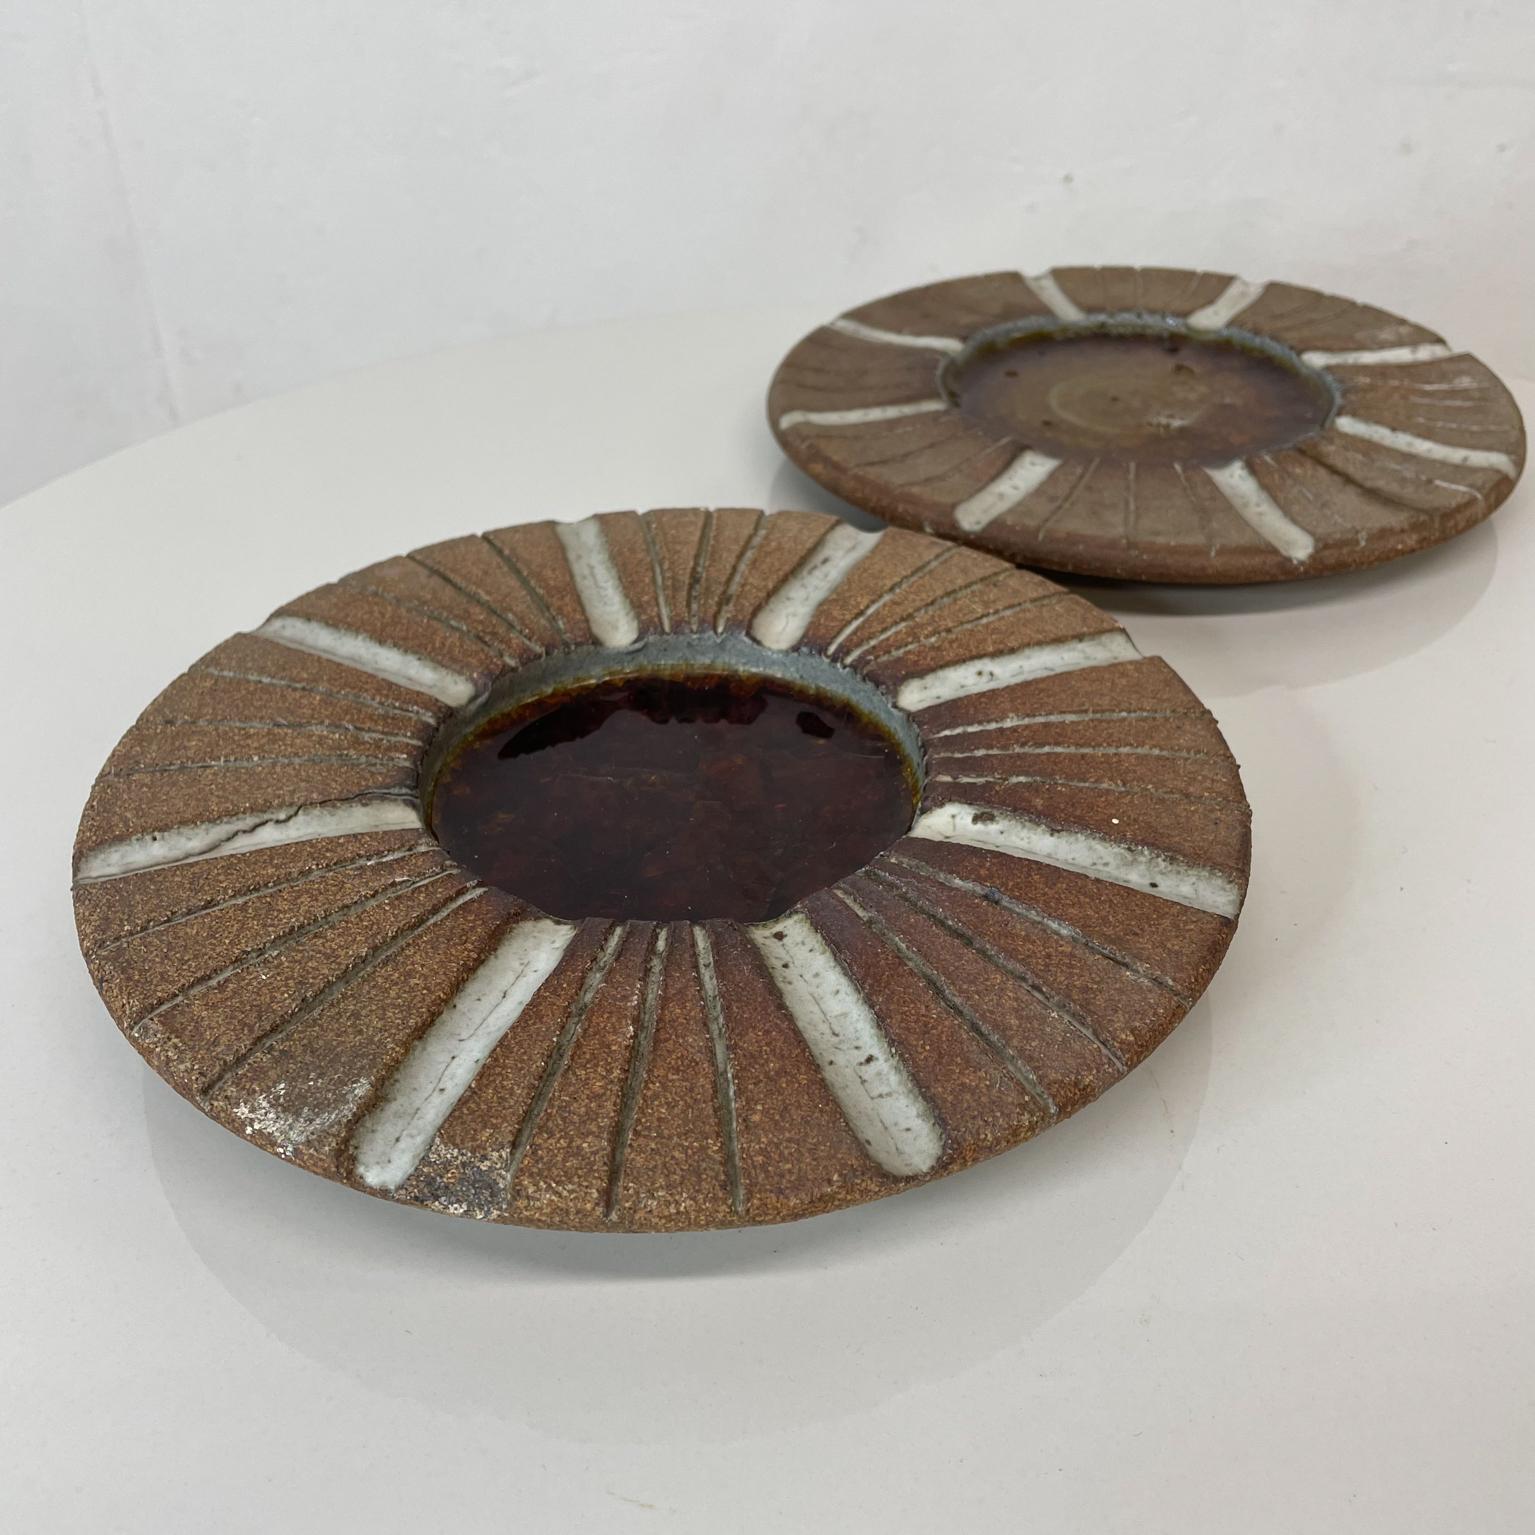 We are offering:
Robert Maxwell decorative plate #2 stoneware pottery Craft Santa Monica, California Mid-Century Modern 1960s
Measures: 8.75 diameter x .88 tall inches
Preowned unrestored good vintage condition.
Refer to images please.